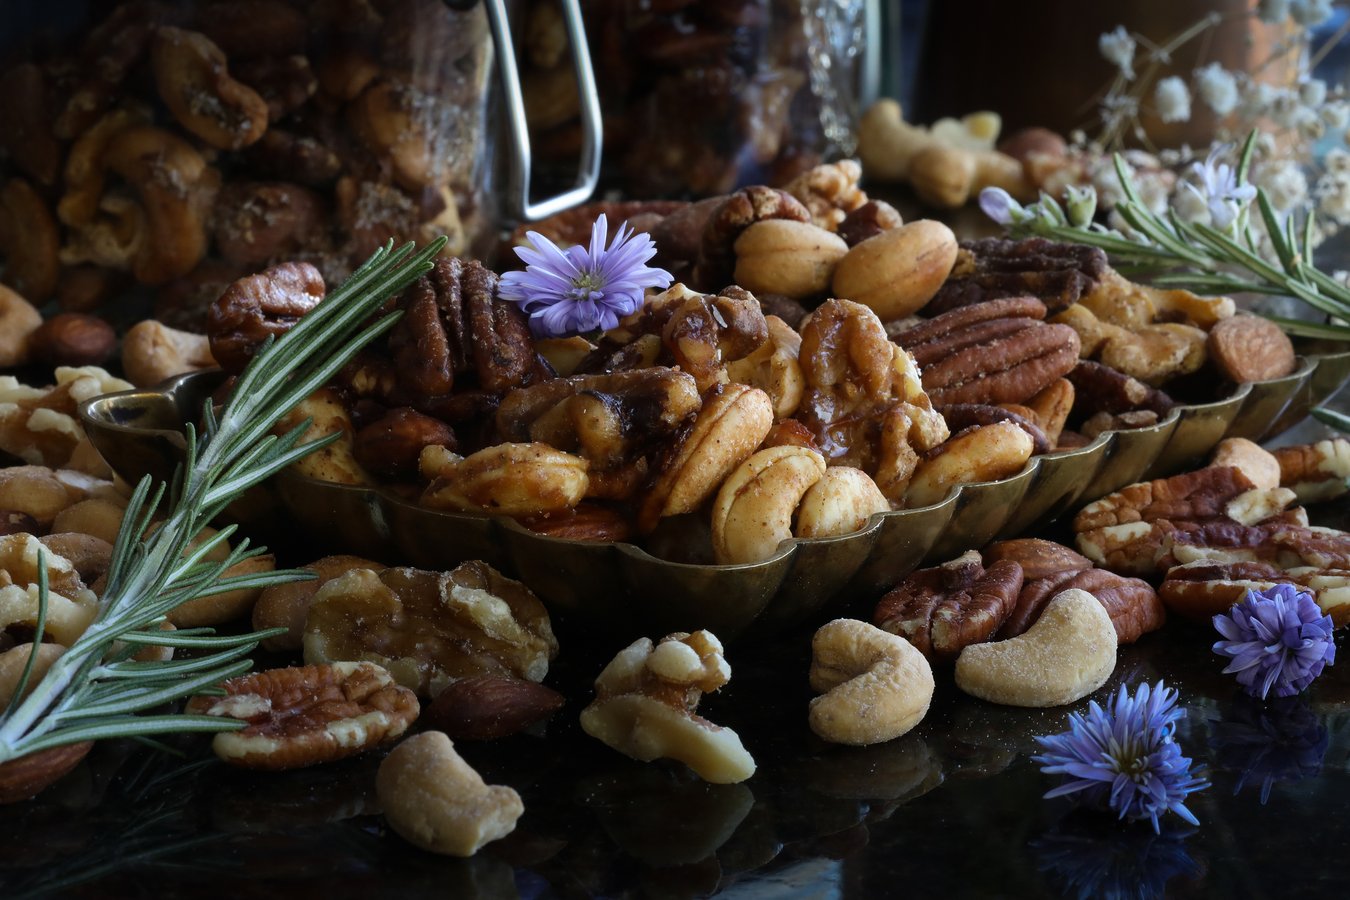 Roasted mixed nuts with herbs and spices